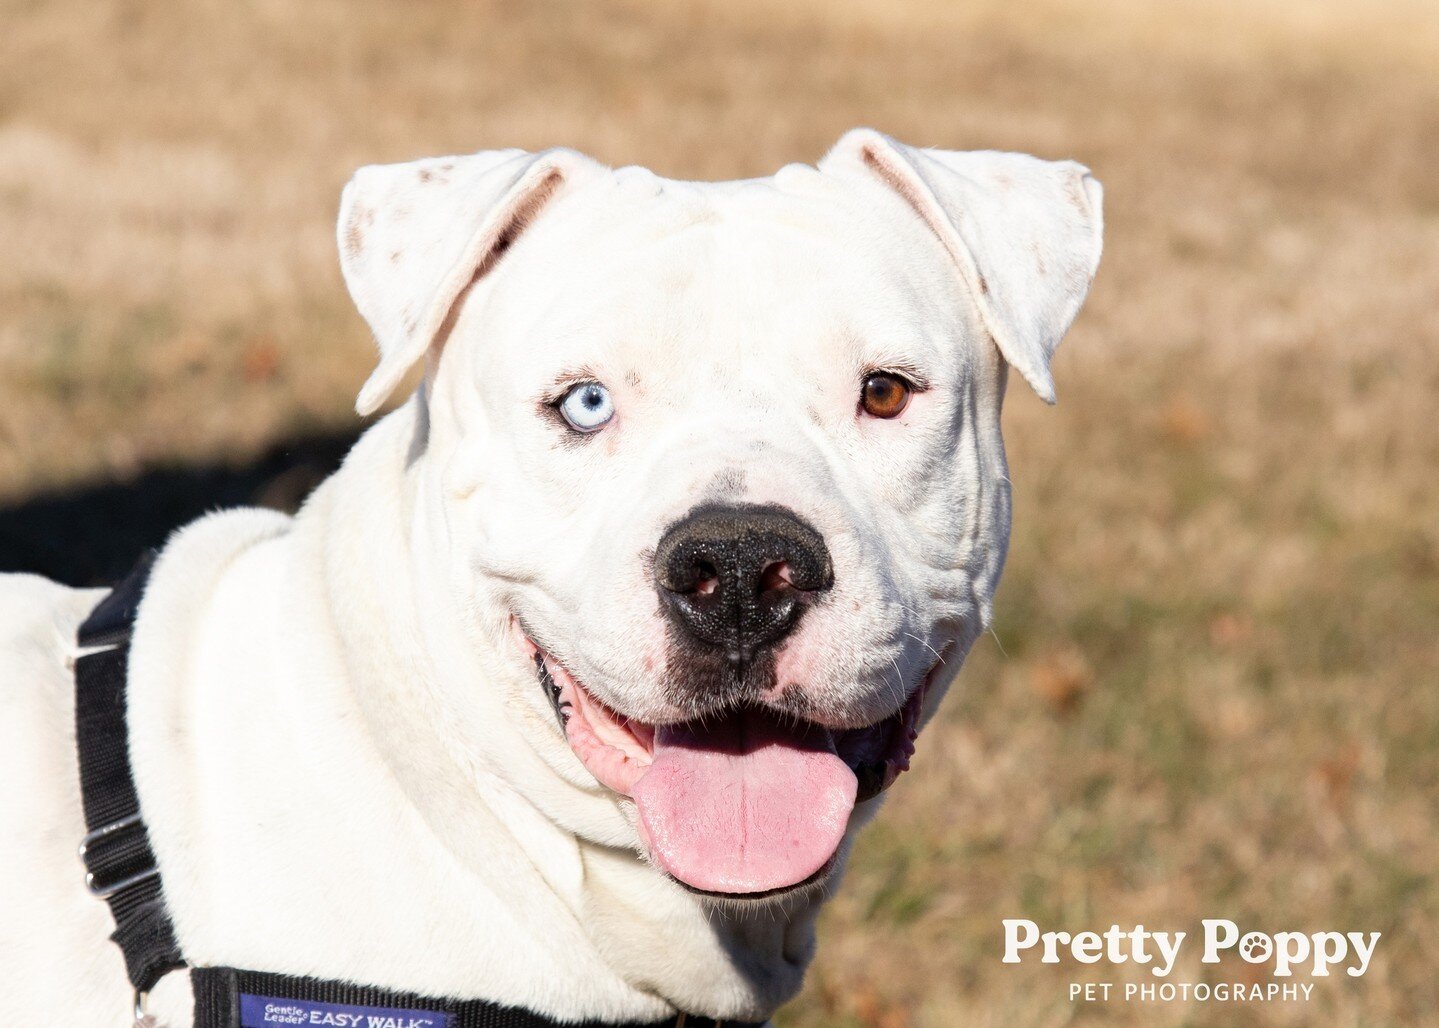 Kilowatt's two colored eyes stand out right away against his all white coat and makes him very unique! Two-colored eyes are very sought after for adopters, so it is no surprise how quickly he got adopted.⁠
⁠
Heterochromia is the condition in which an